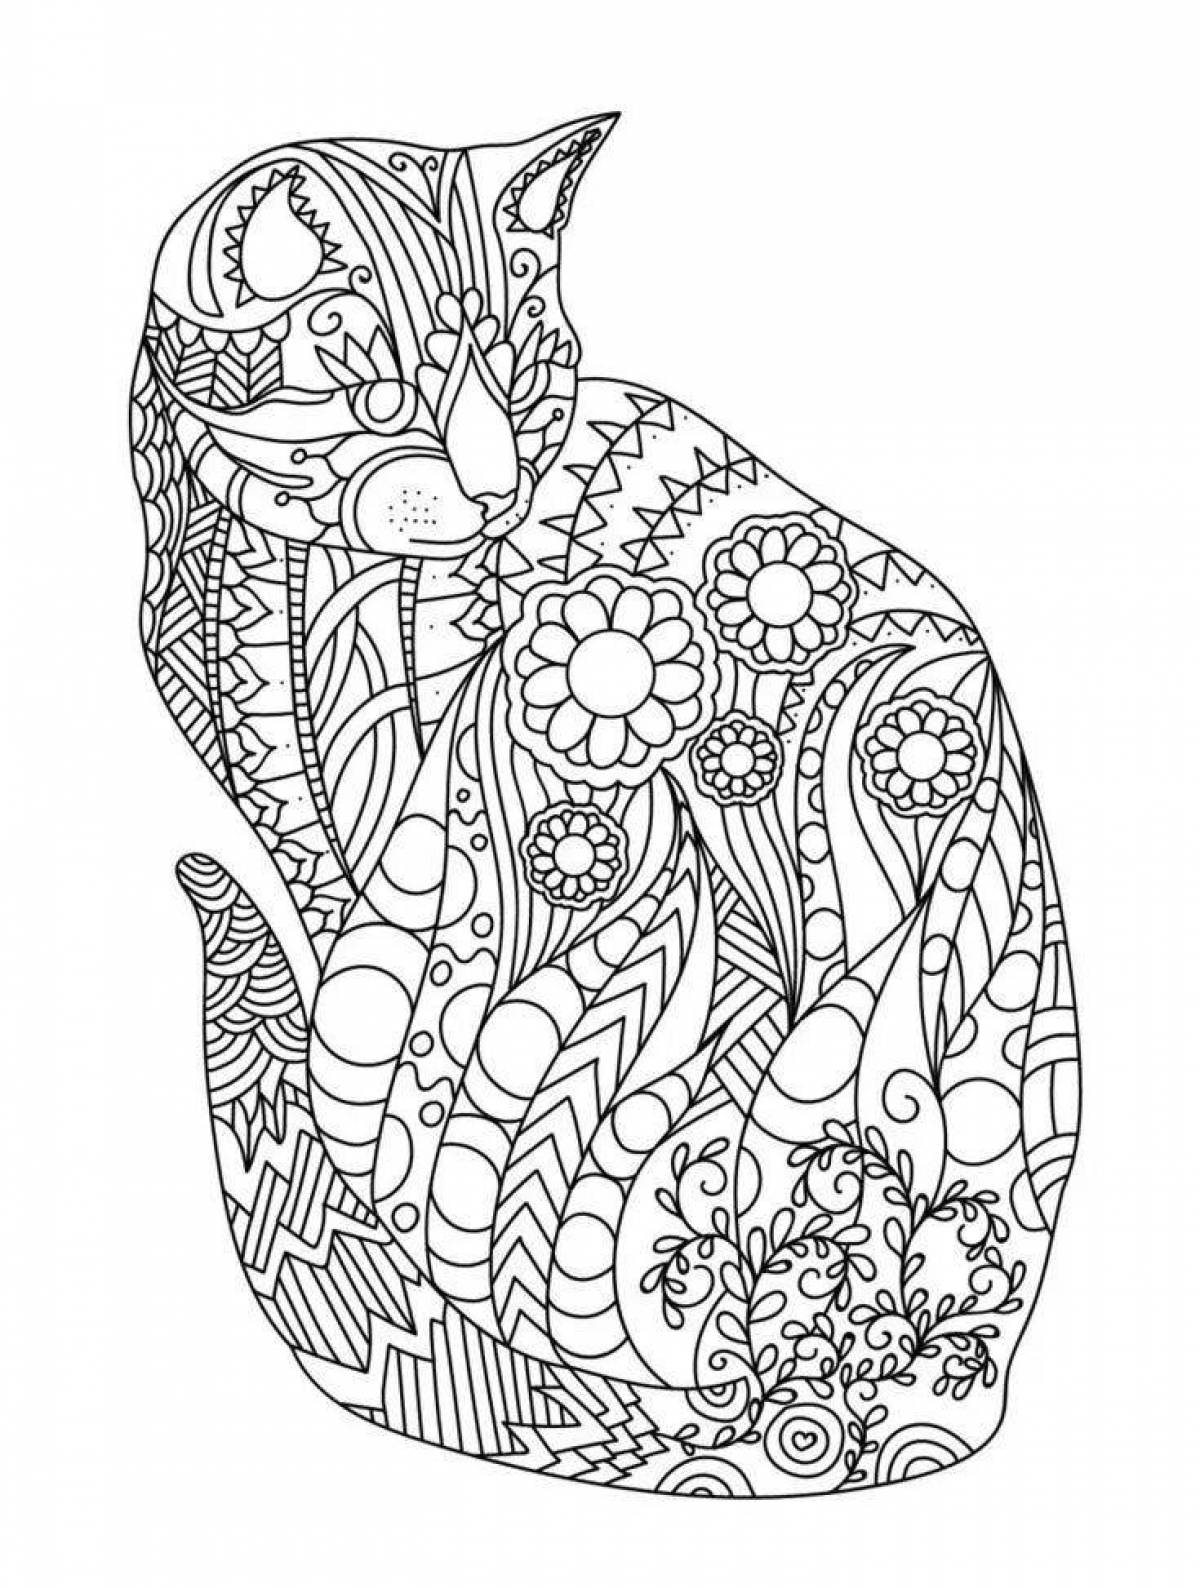 Peaceful stress relief coloring book